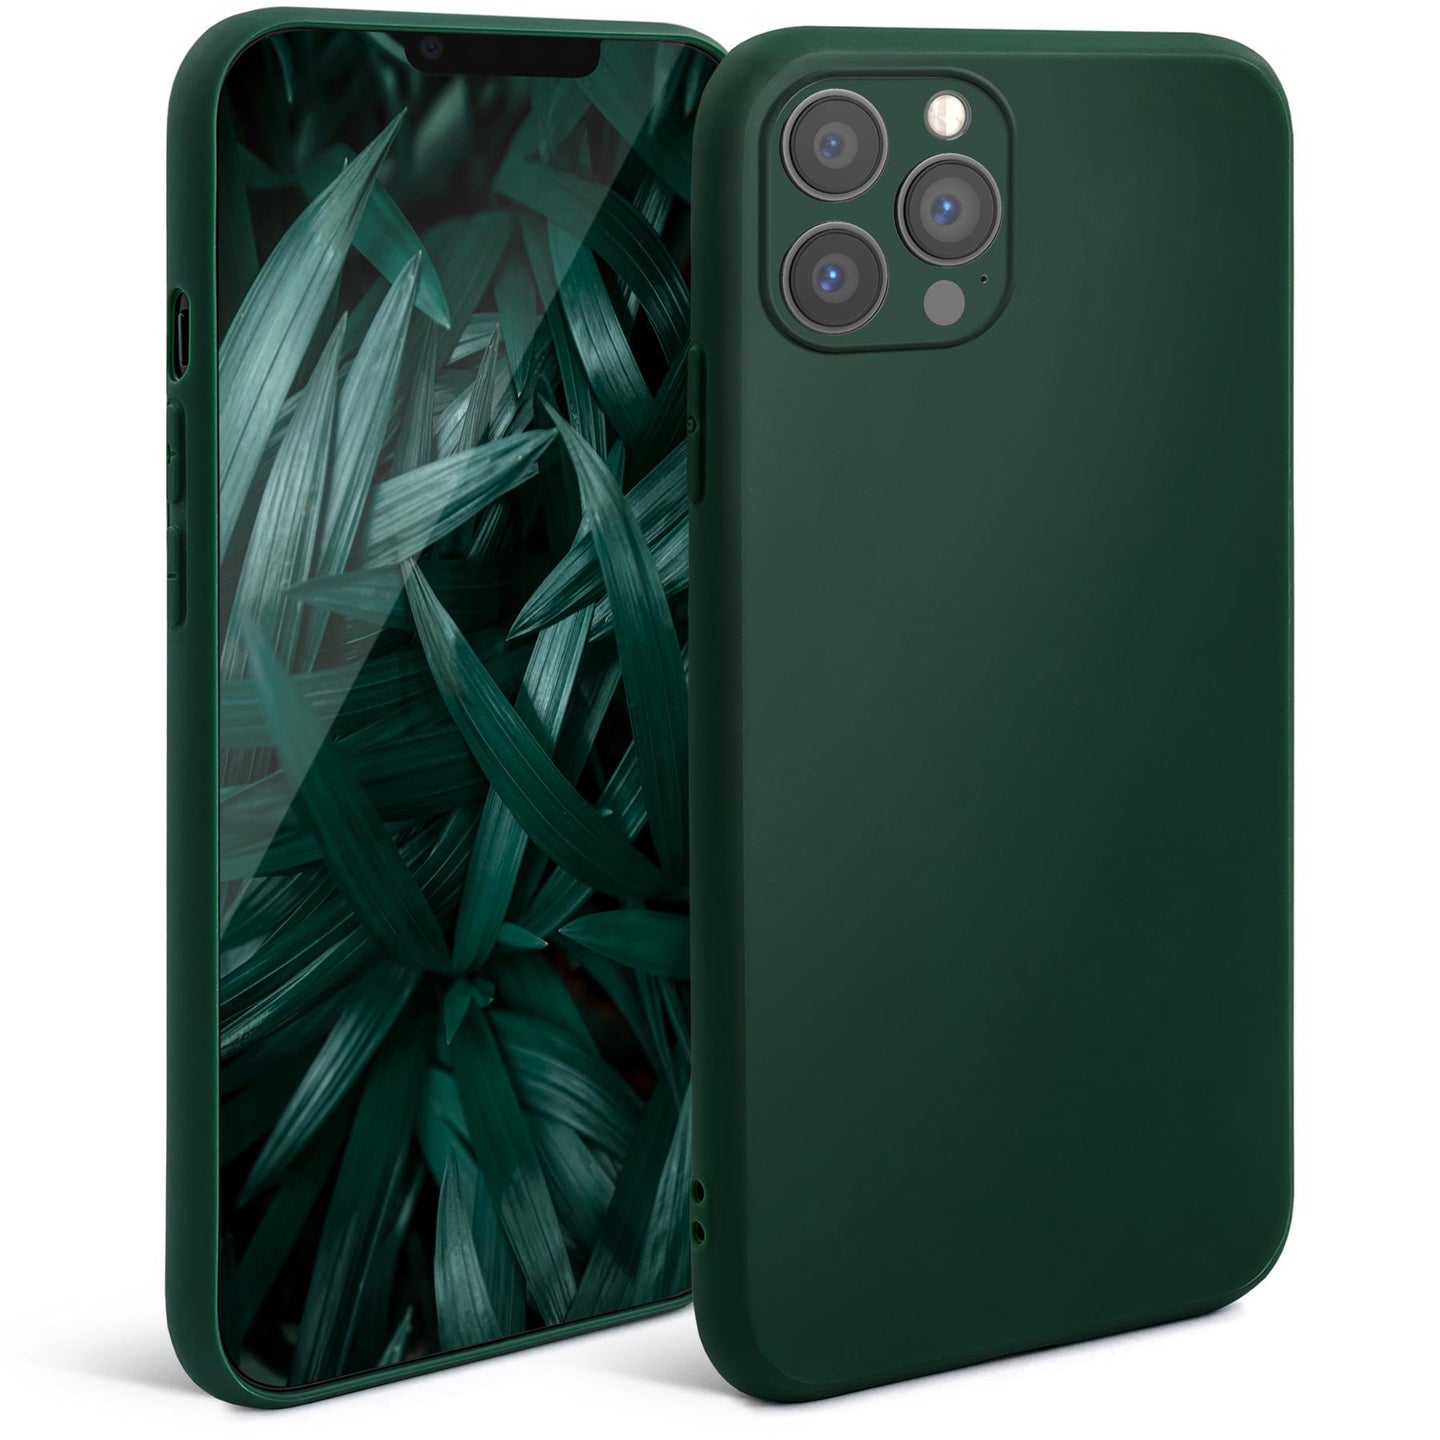 Moozy Minimalist Series Silicone Case for iPhone 13 Pro, Midnight Green - Matte Finish Lightweight Mobile Phone Case Slim Soft Protective